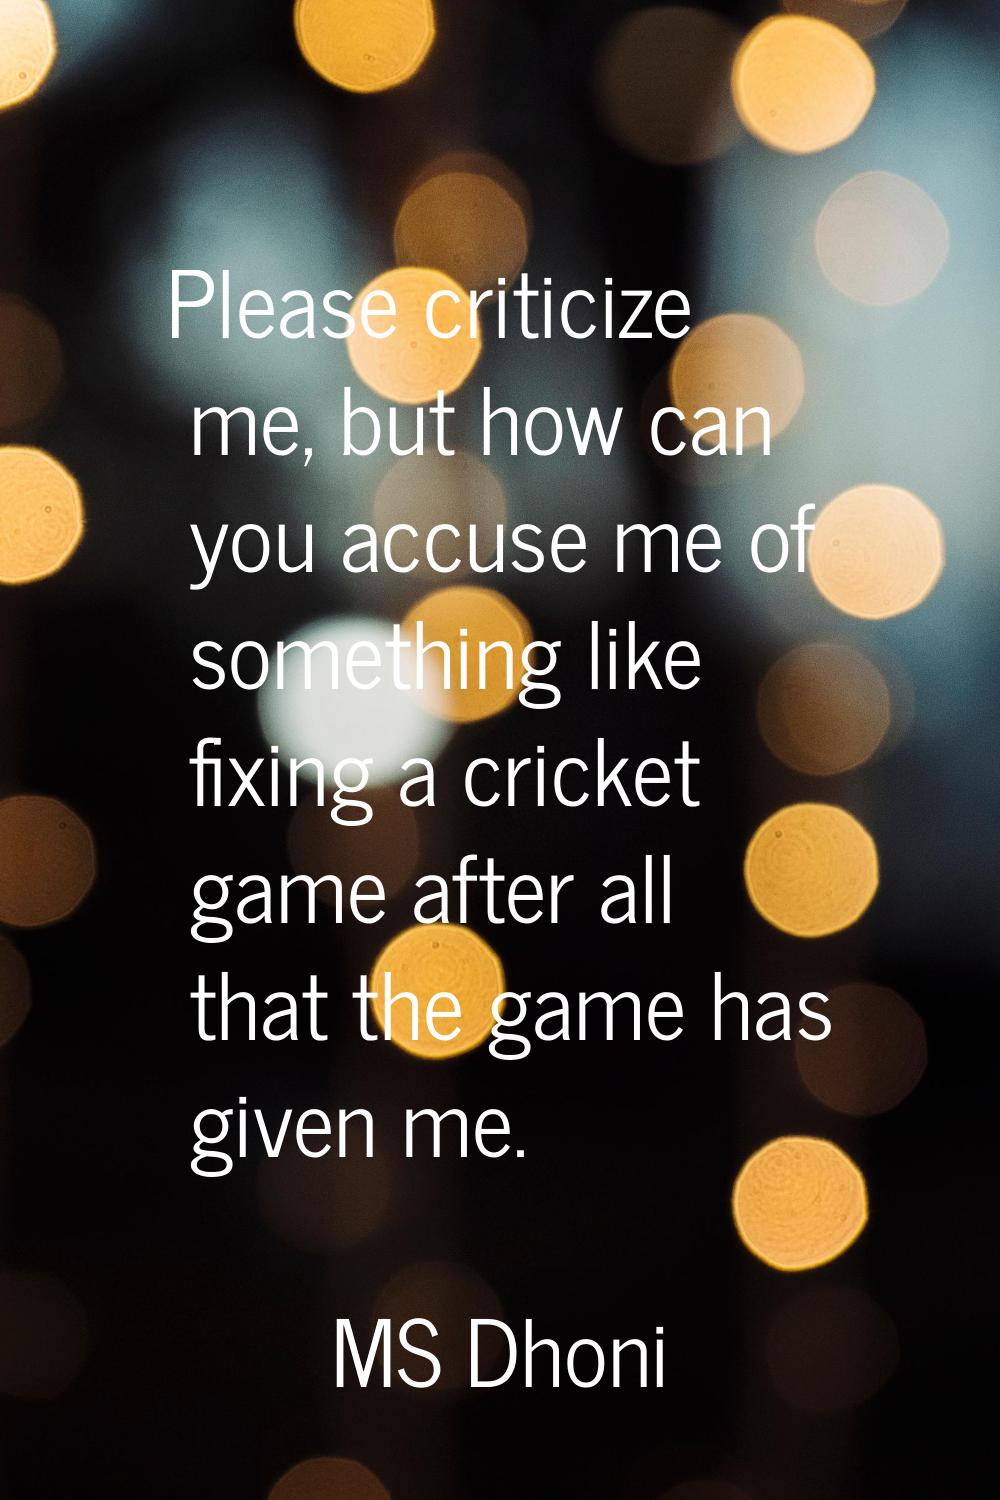 Please criticize me, but how can you accuse me of something like fixing a cricket game after all th